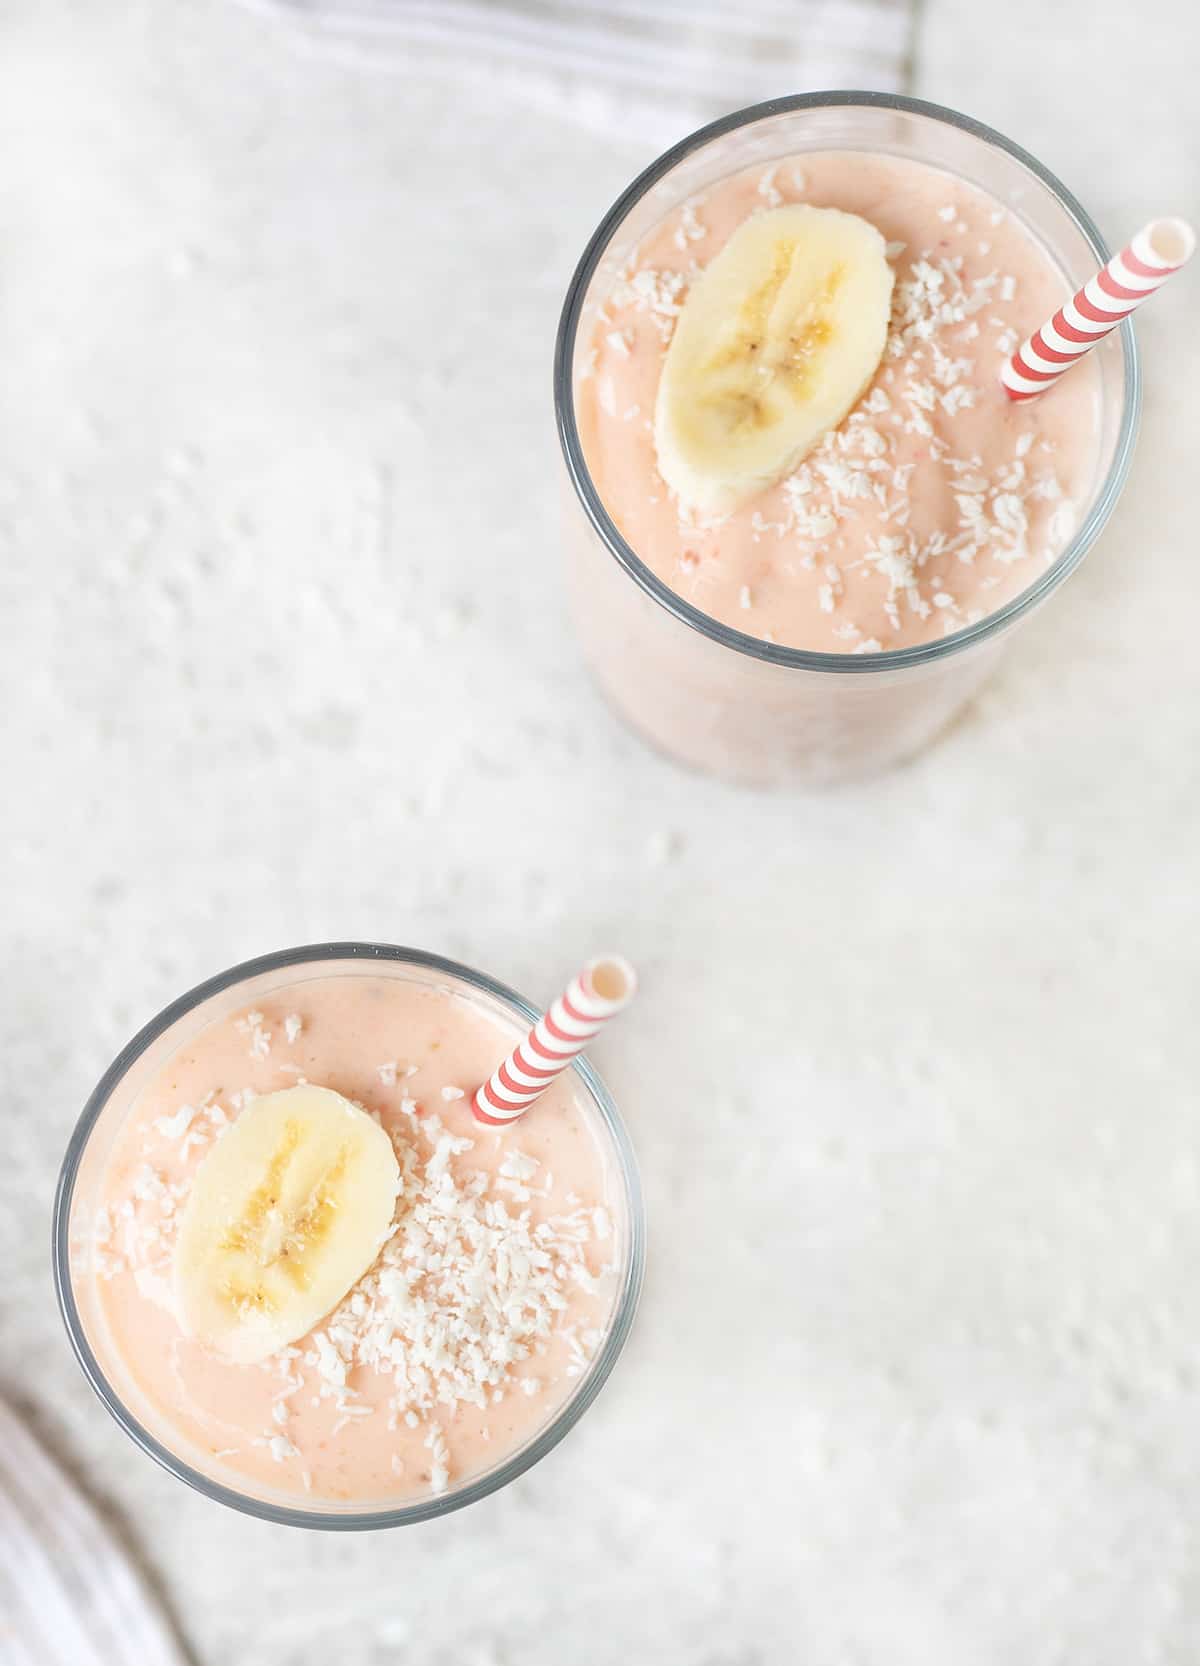 2 cups of the healthy Yogurt Smoothies topped with fresh banana slice.